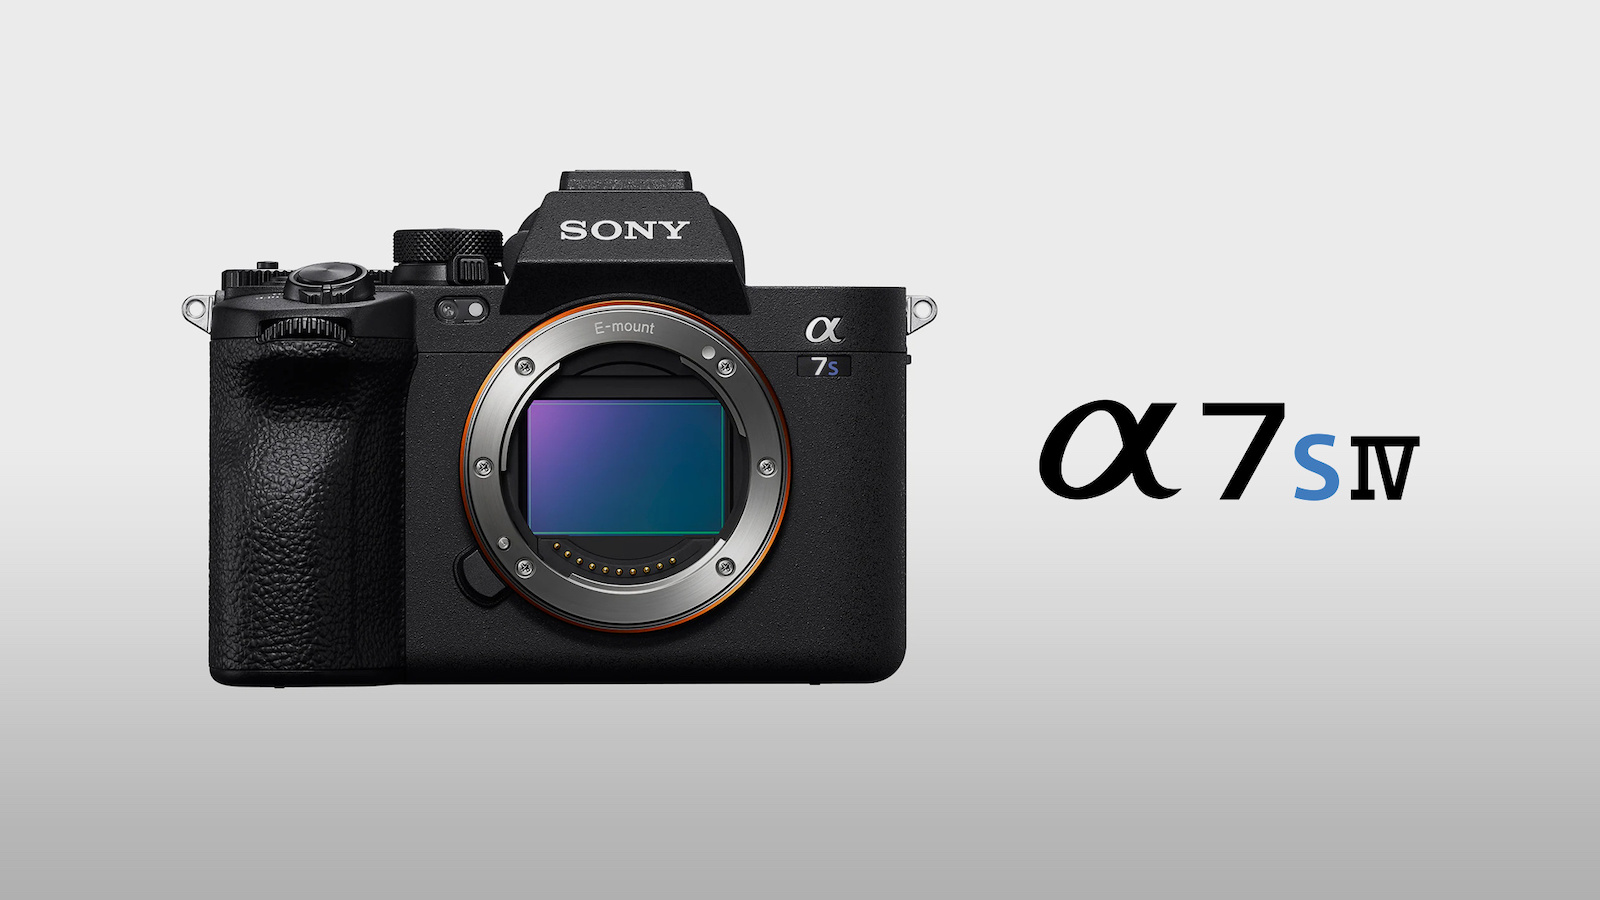 This is the upcoming Sony a7s IV camera - Photo Rumors